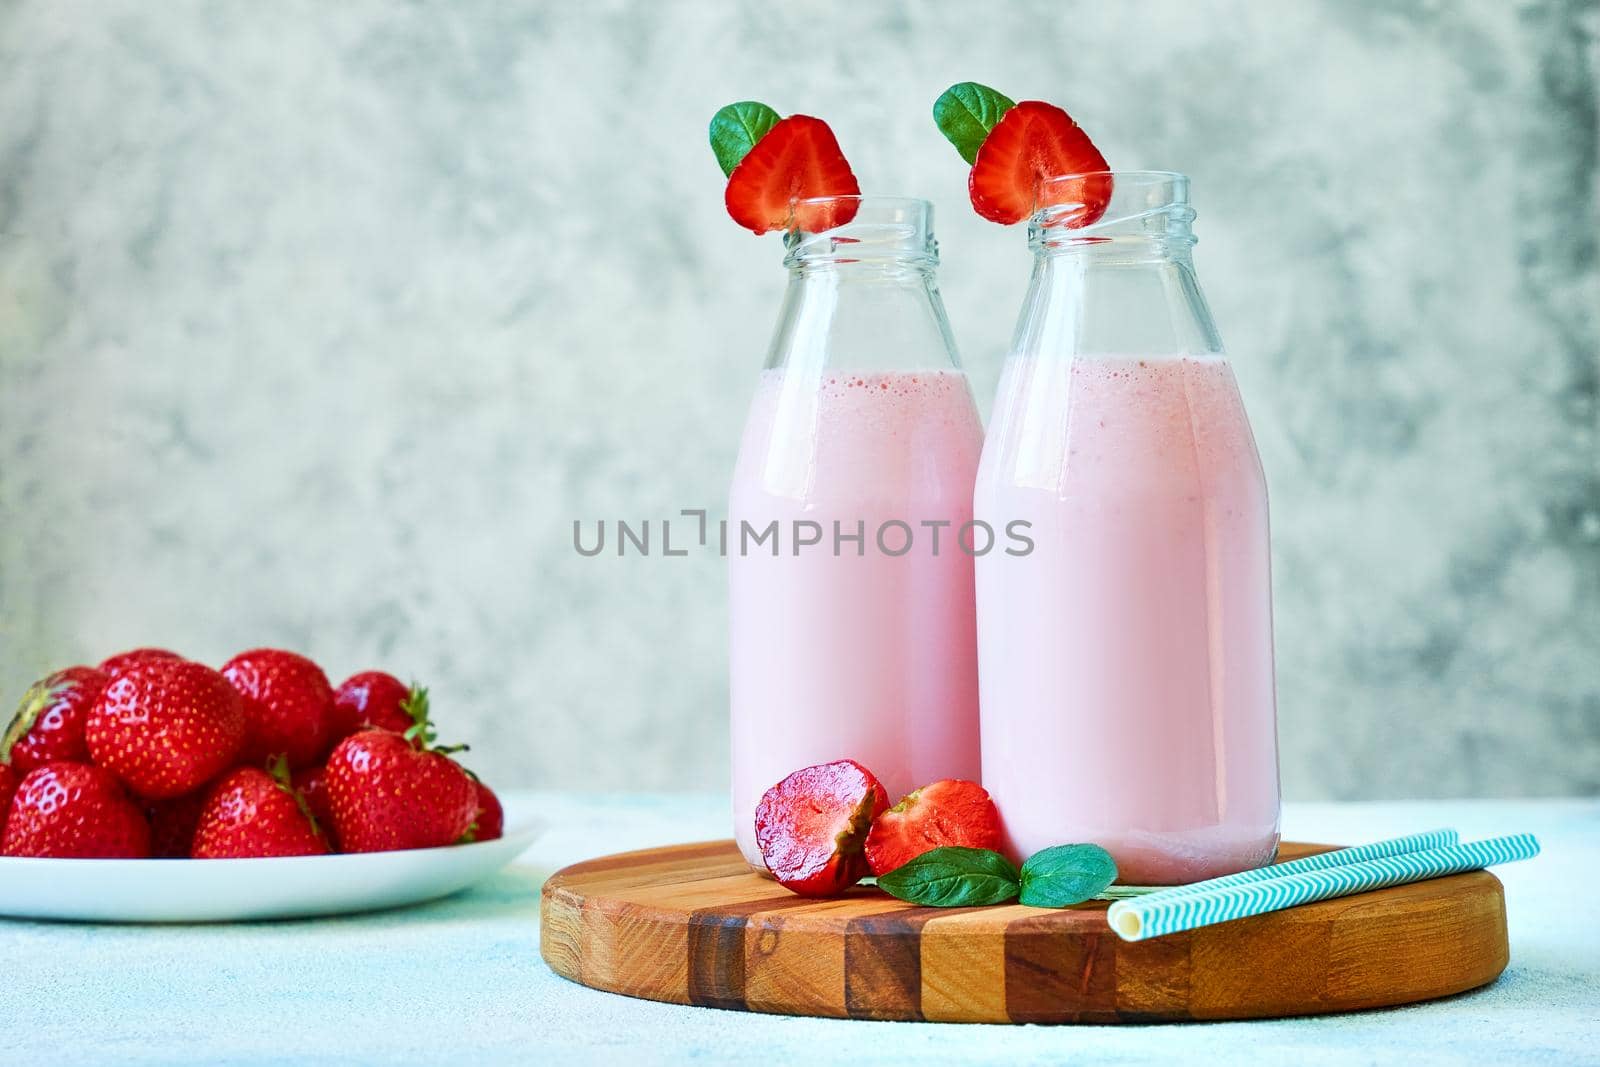 Close-up strawberry smoothie or milkshake in glass jar with berries on wooden board on blue concrete background. Healthy summer drink.